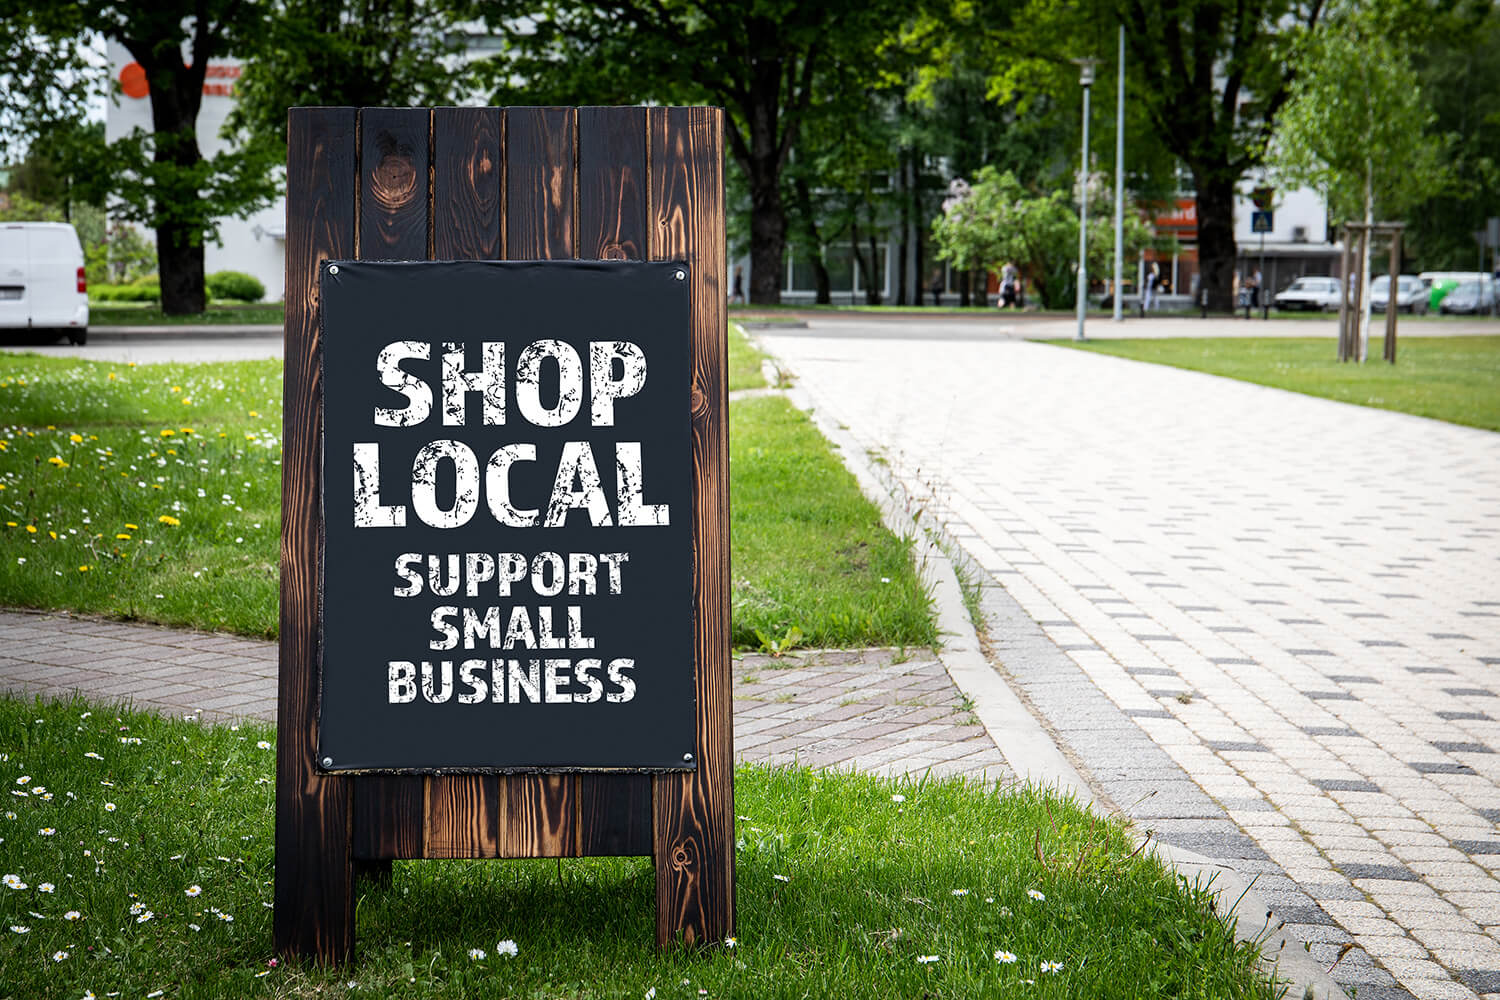 A-Frame sign next to roadway, written on it, "Shop Local, Support Small Business."